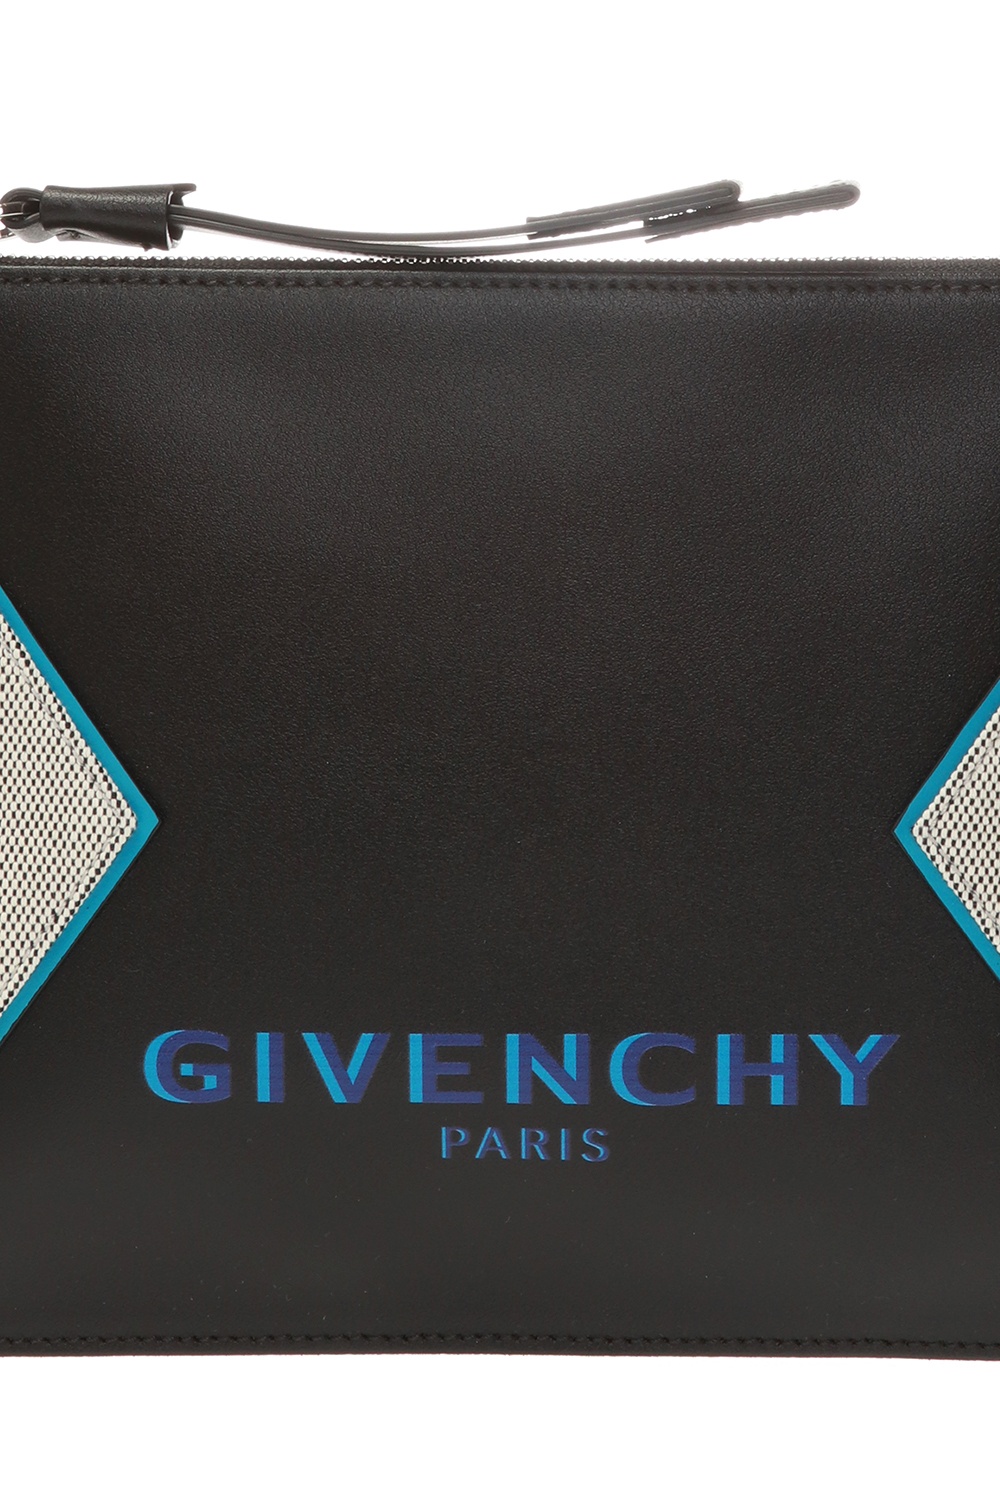 givenchy logo pouch